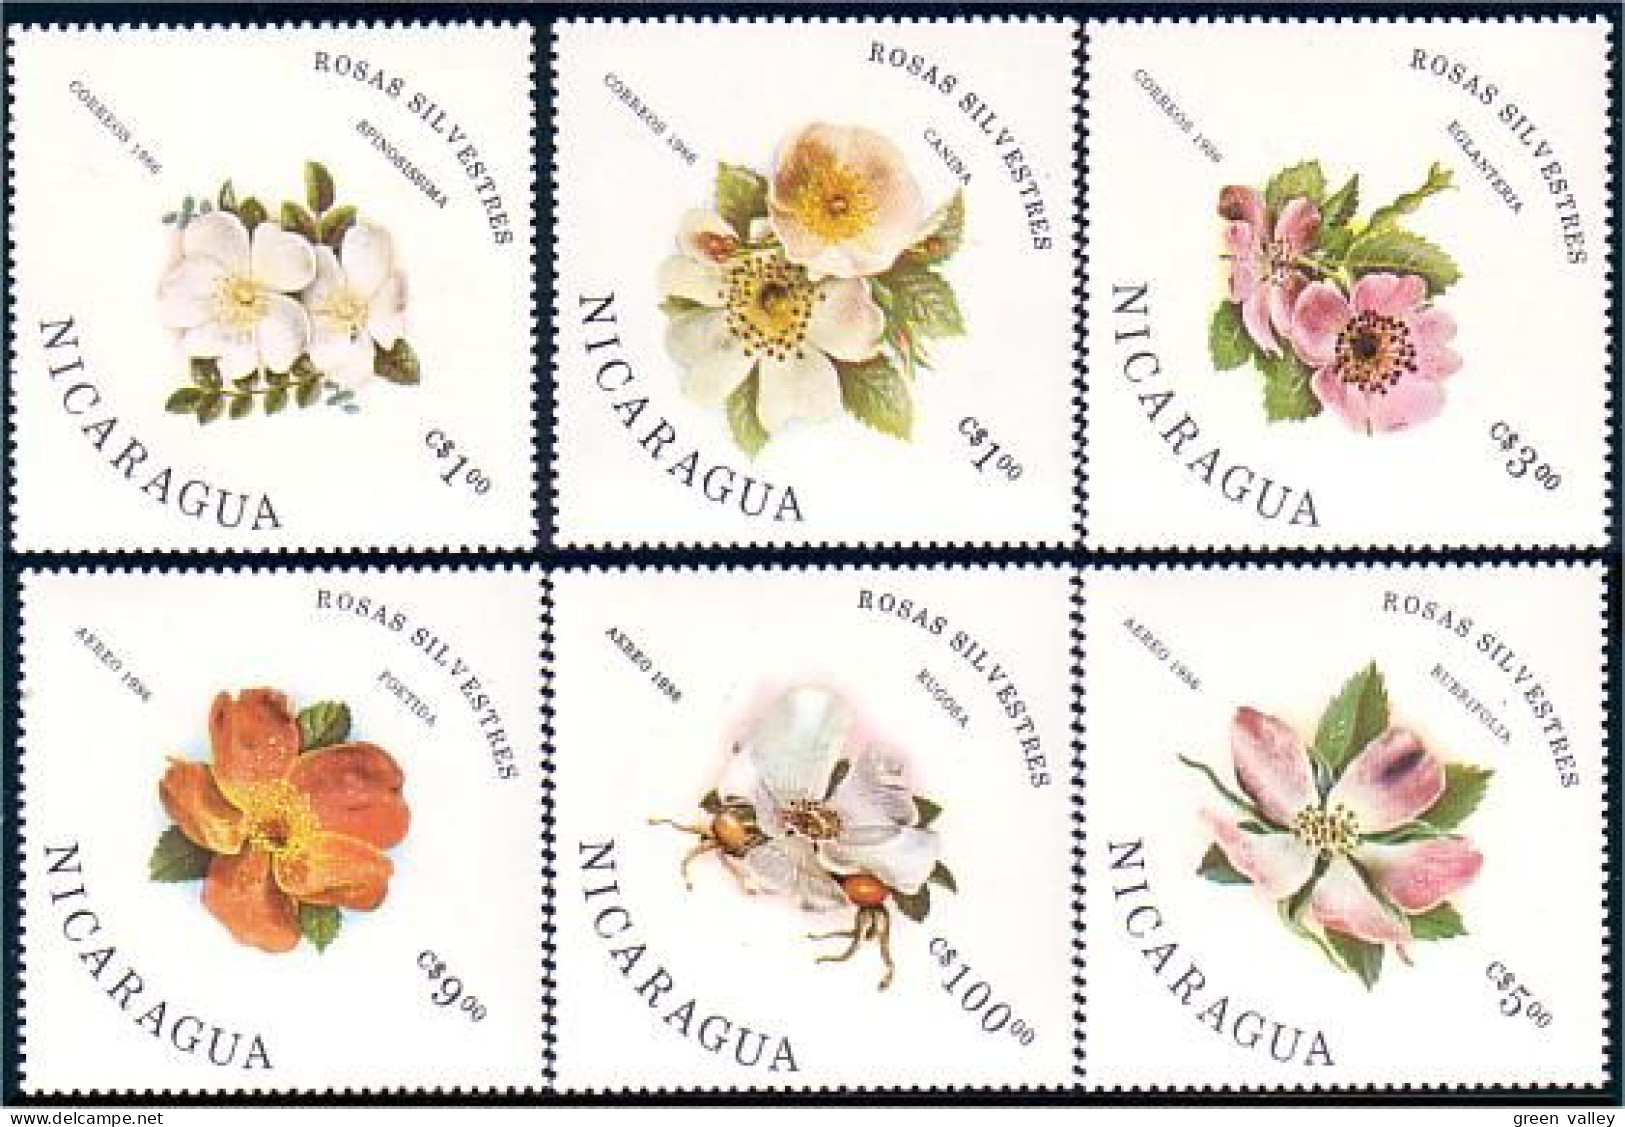 684 Nicaragua Roses Sauvages Des Bois Forest Wild Roses MNH ** Neuf SC (NIC-52c) - Roses